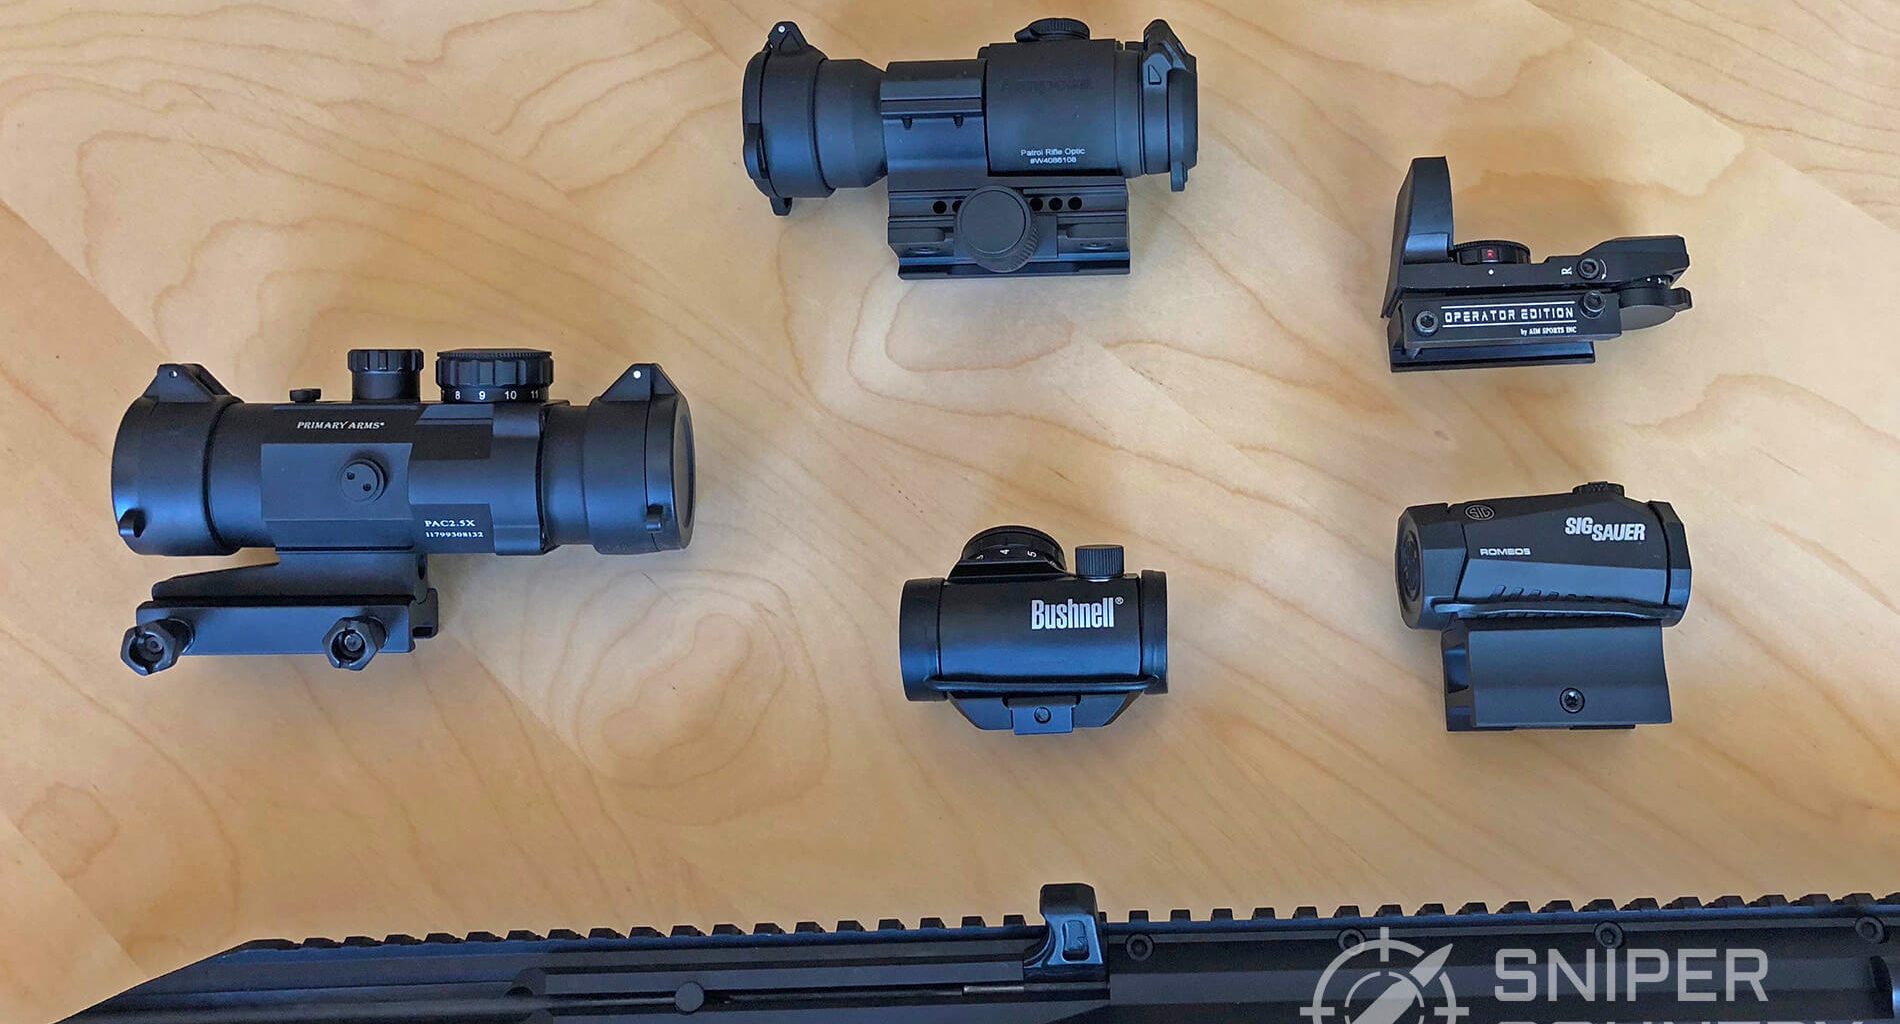 Selection of red dot sights and 9mm carbine